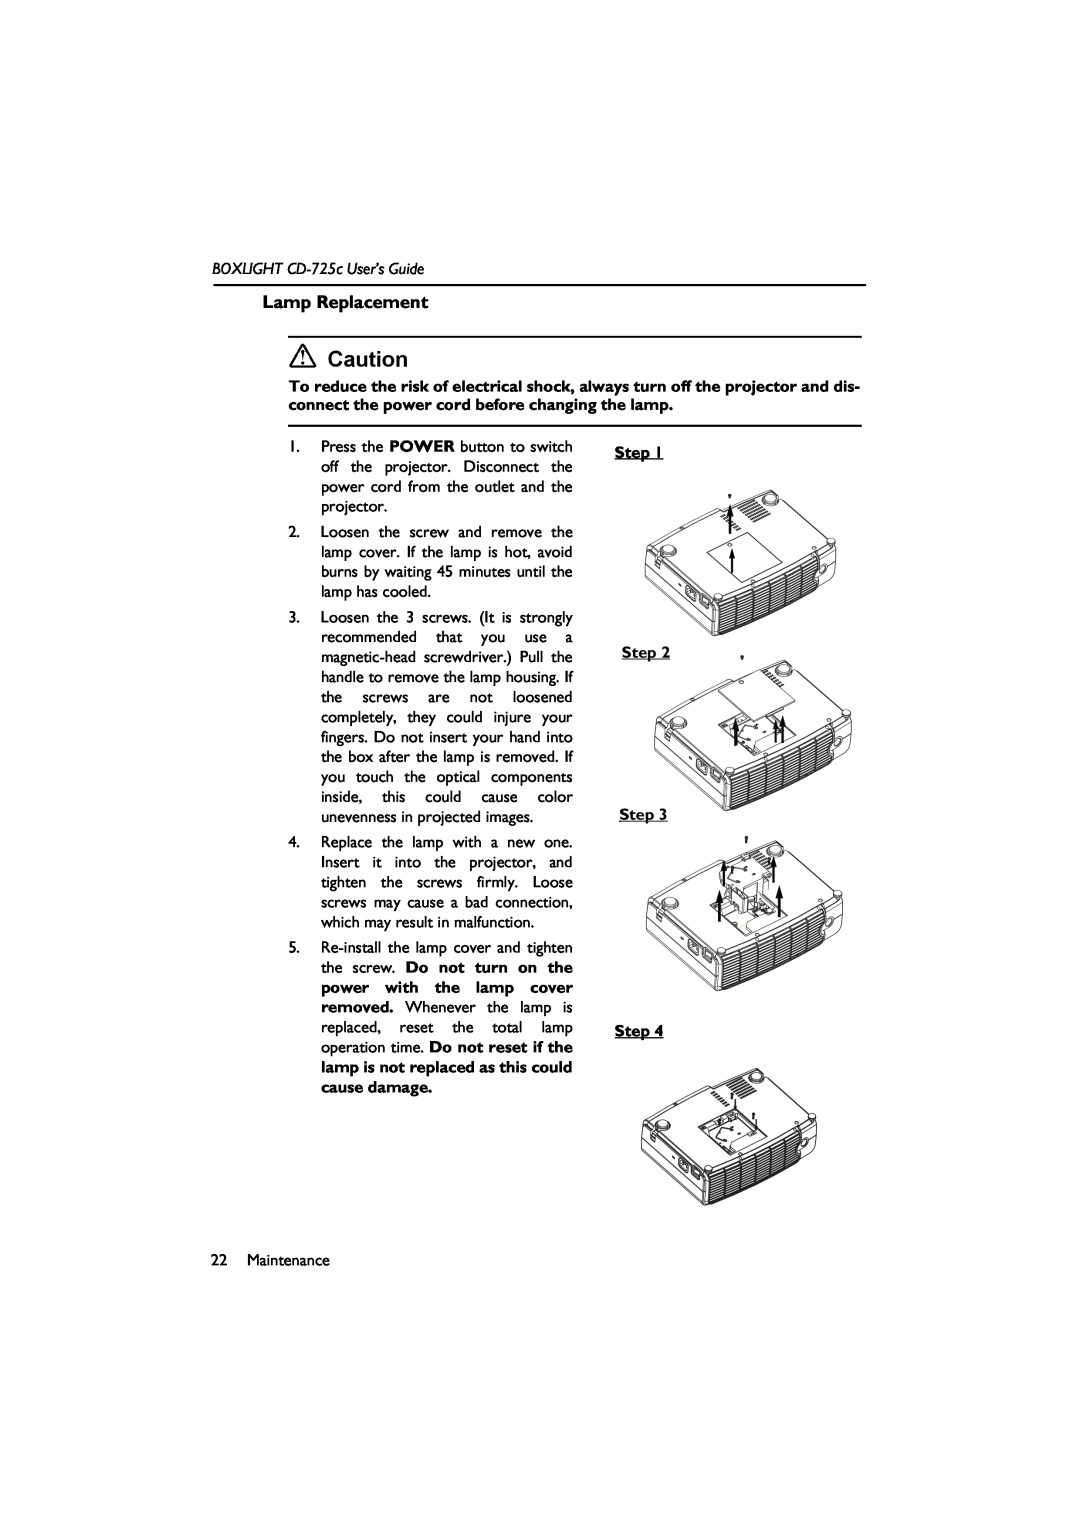 BOXLIGHT manual Lamp Replacement, BOXLIGHT CD-725c User’s Guide, Step Step Step Step 